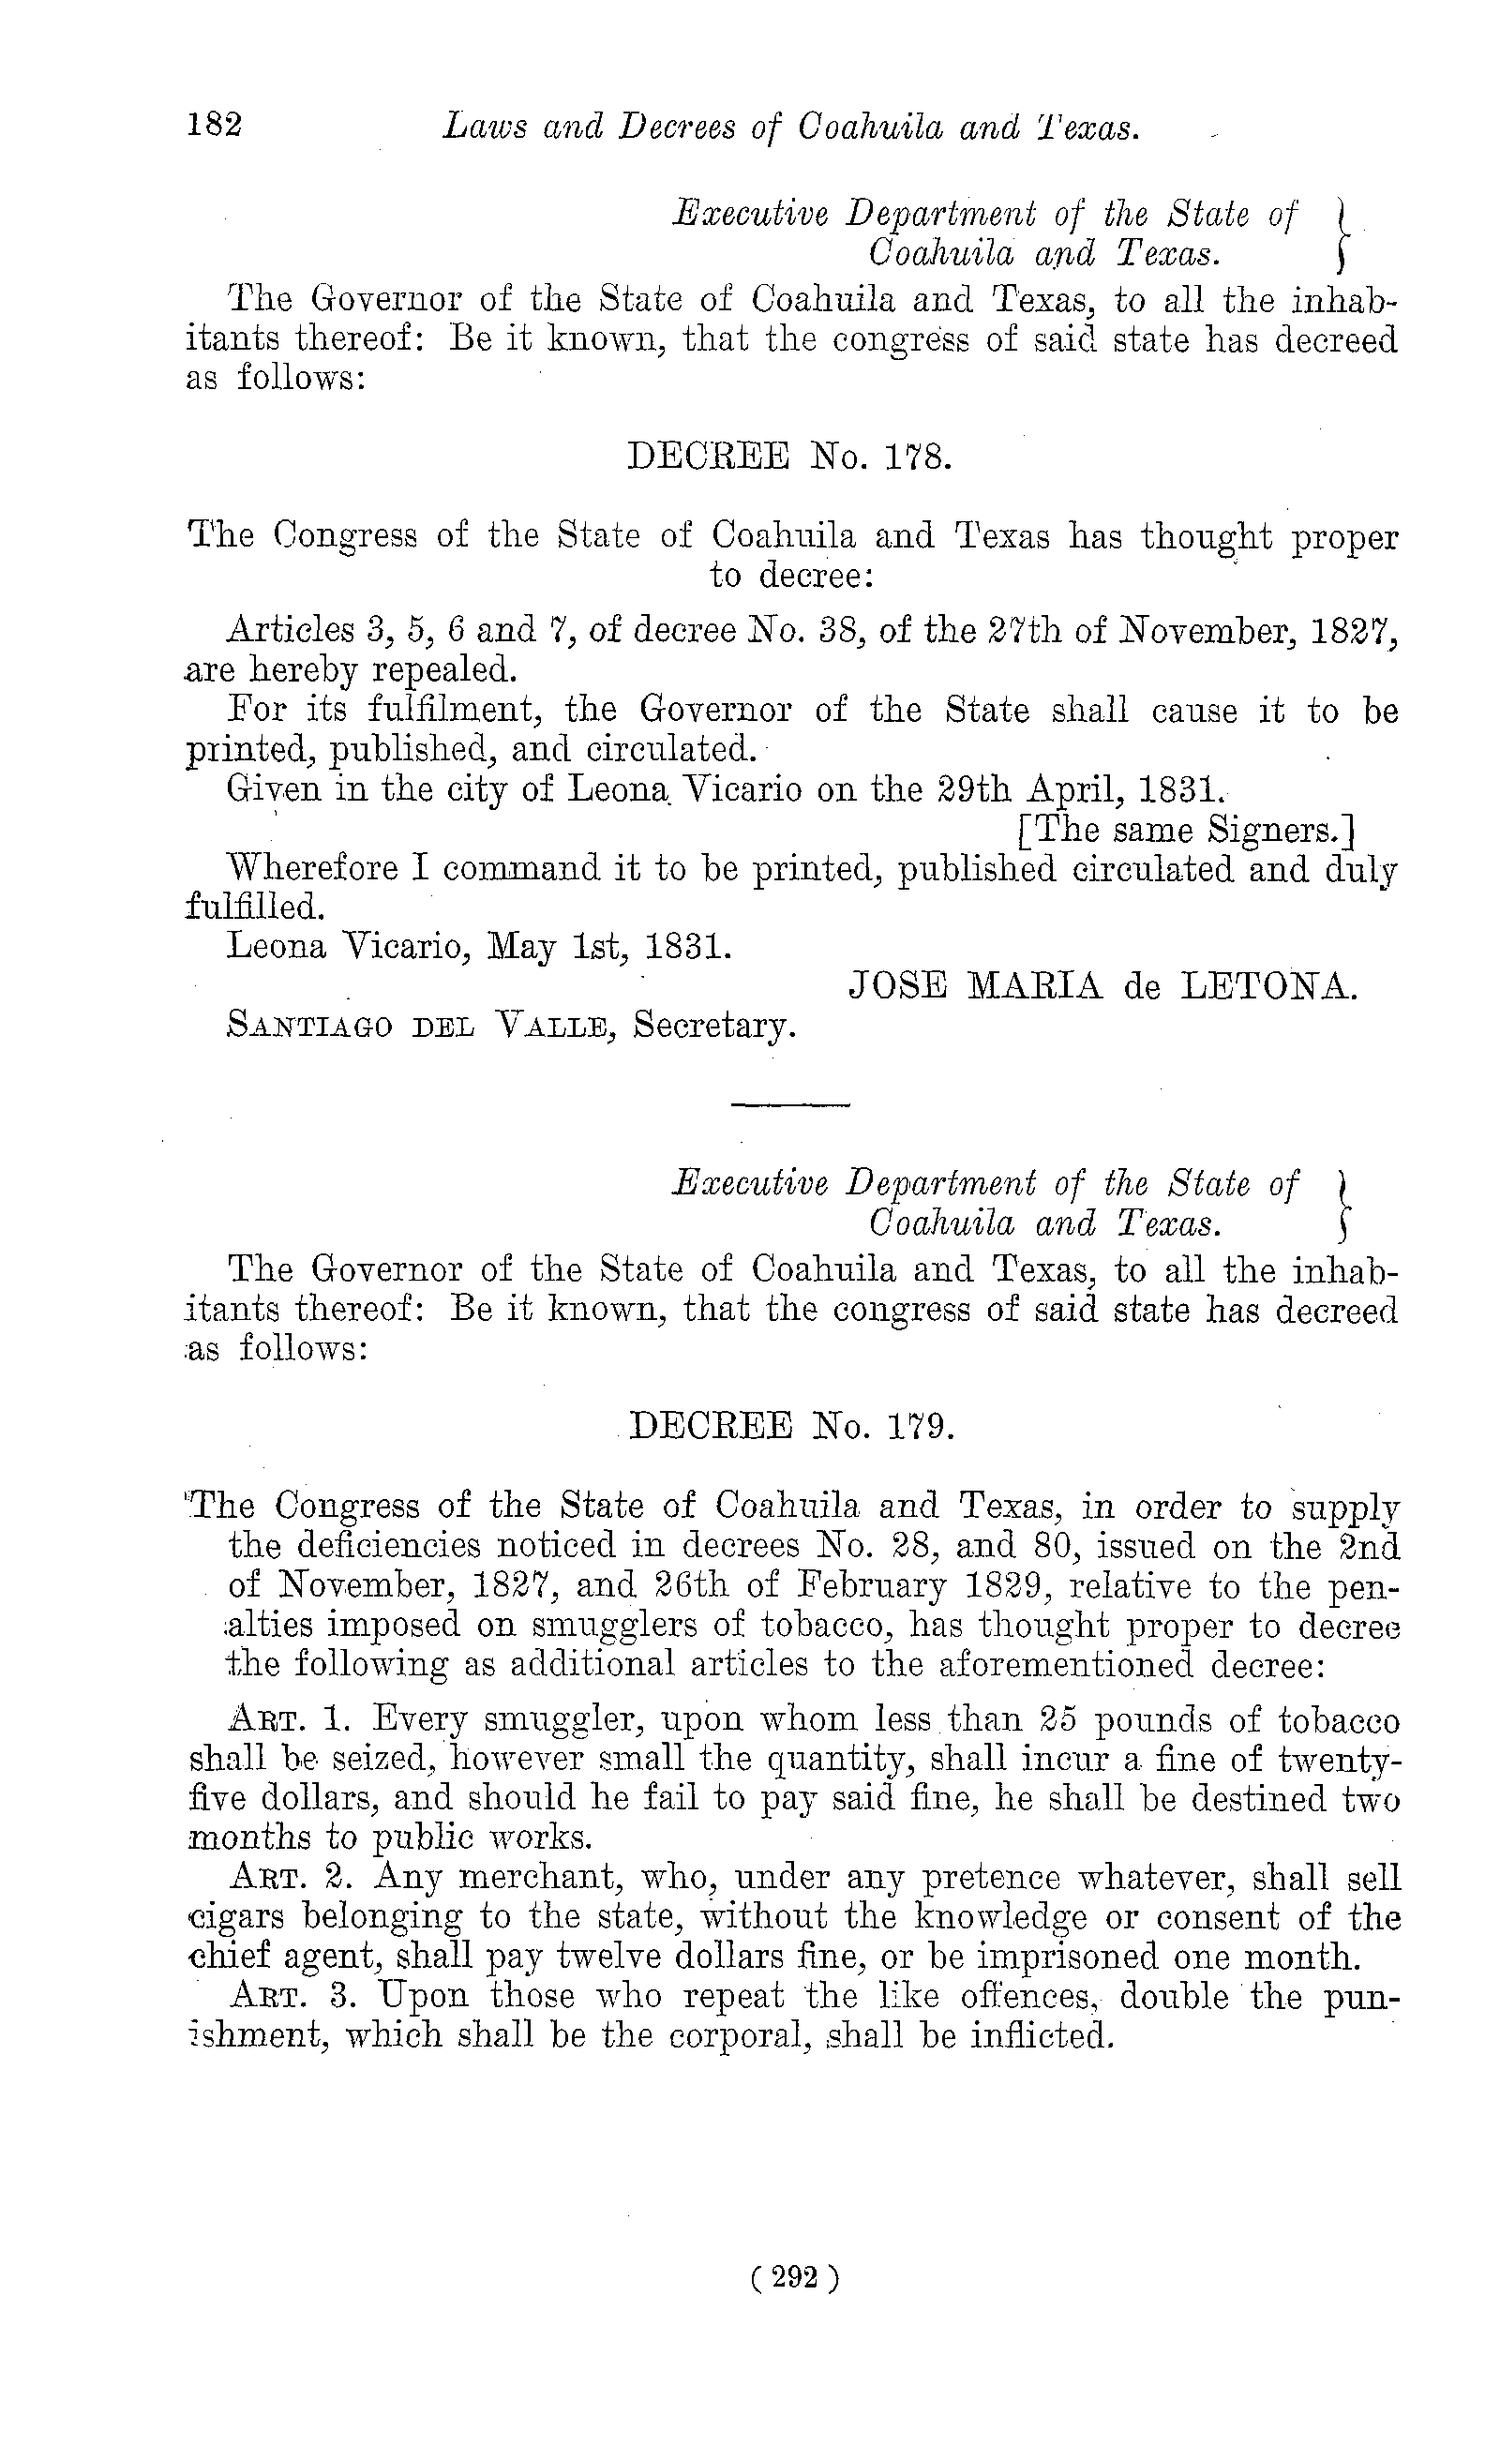 The Laws of Texas, 1822-1897 Volume 1
                                                
                                                    292
                                                